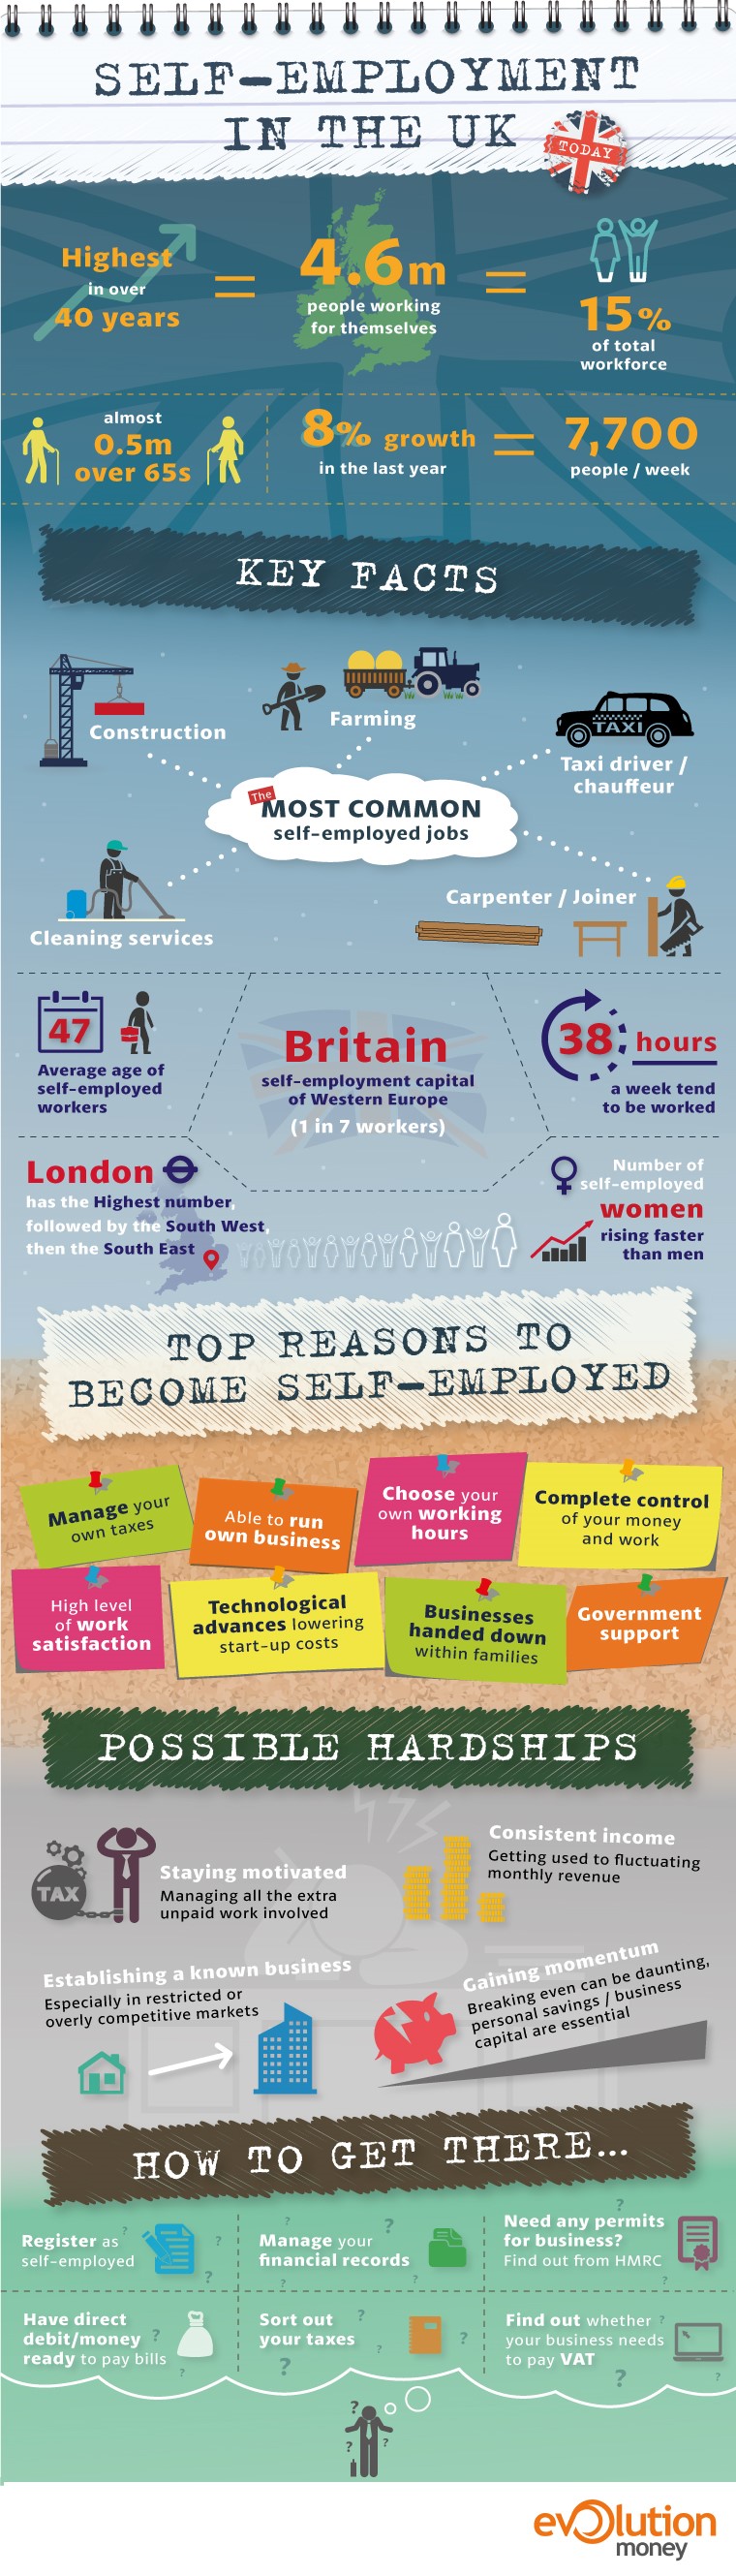 Self-Employment in the UK